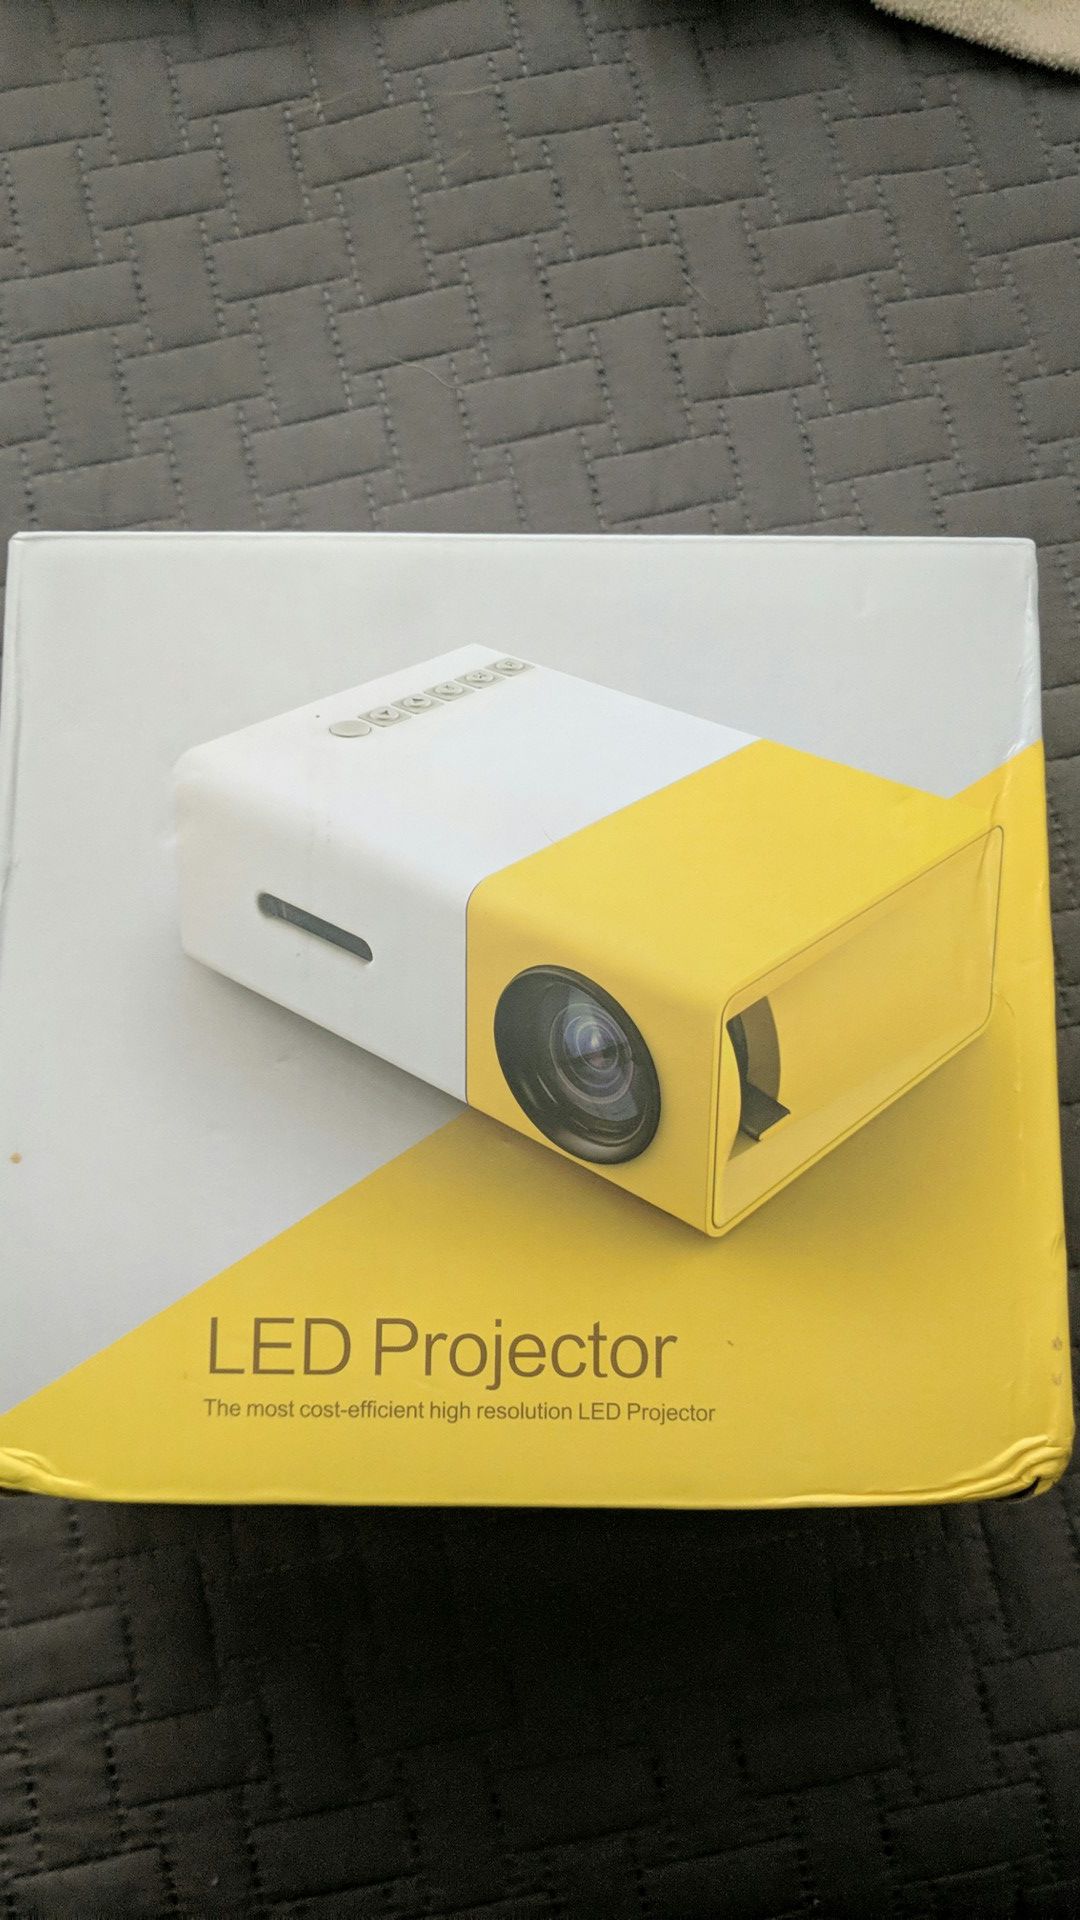 LED projector brand new never used